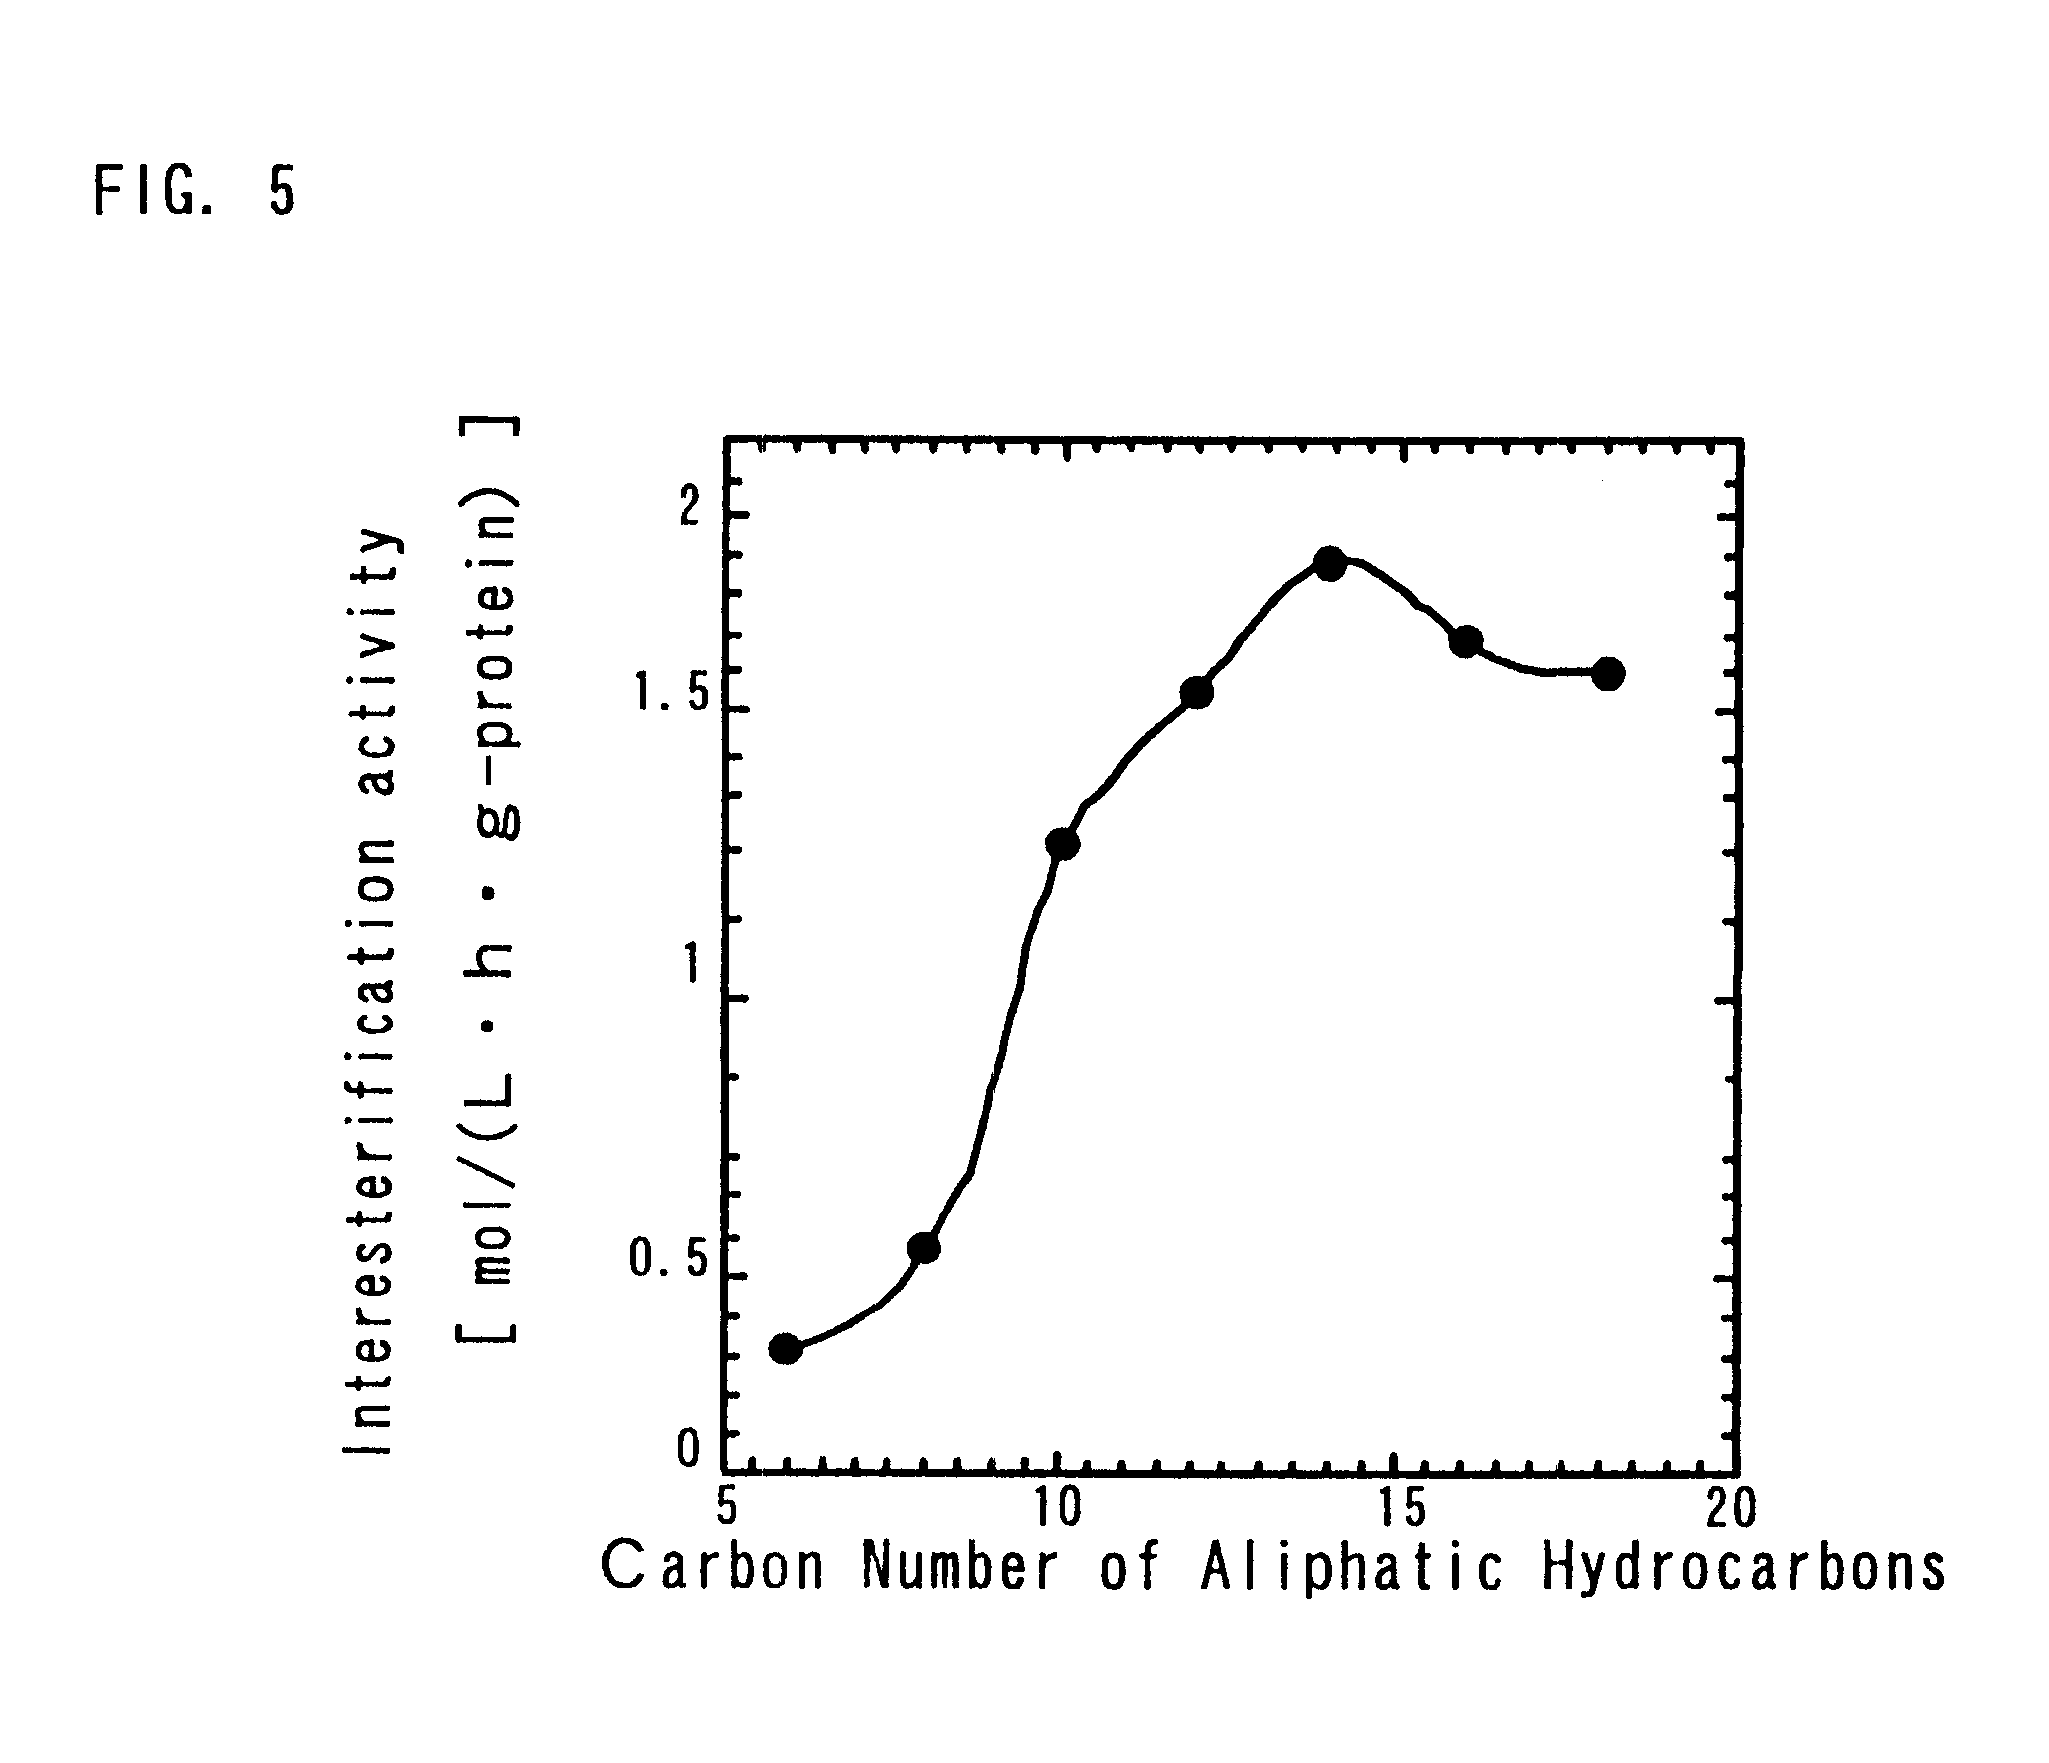 Method of producing activated lipase